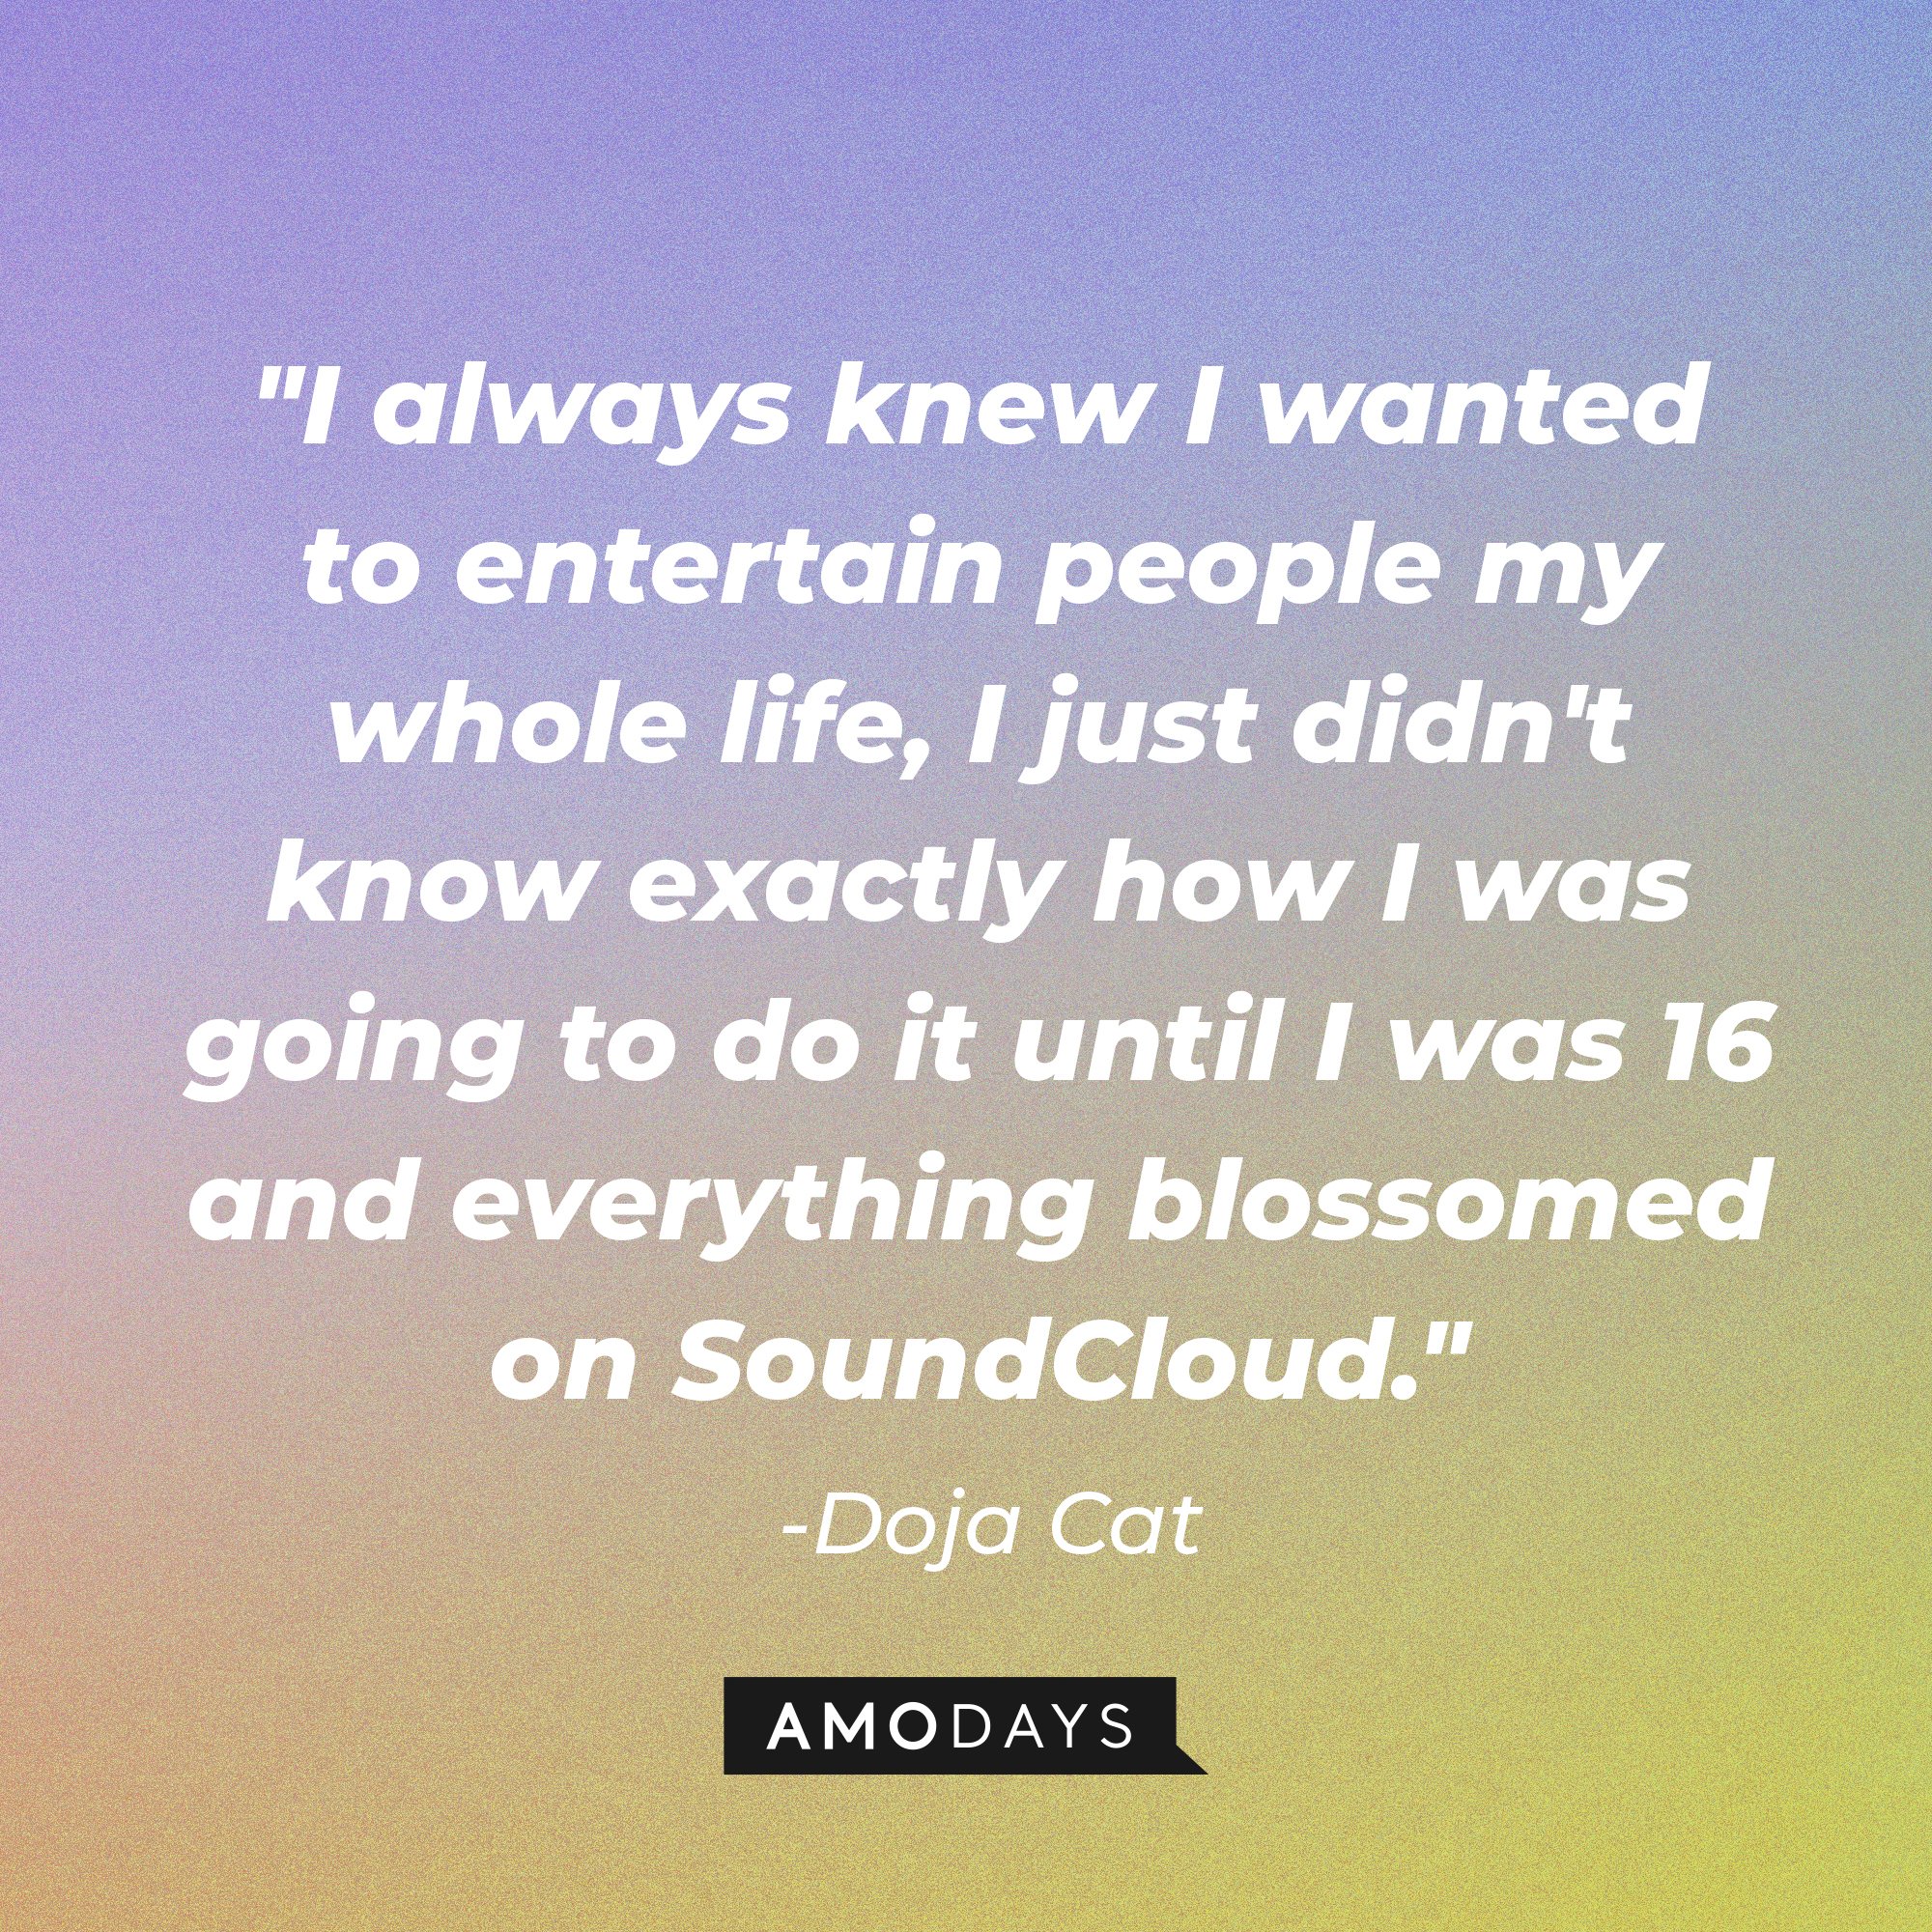 Doja Cat's quote: "I always knew I wanted to entertain people my whole life, I just didn't know exactly how I was going to do it until I was 16 and everything blossomed on SoundCloud." | Image: AmoDays